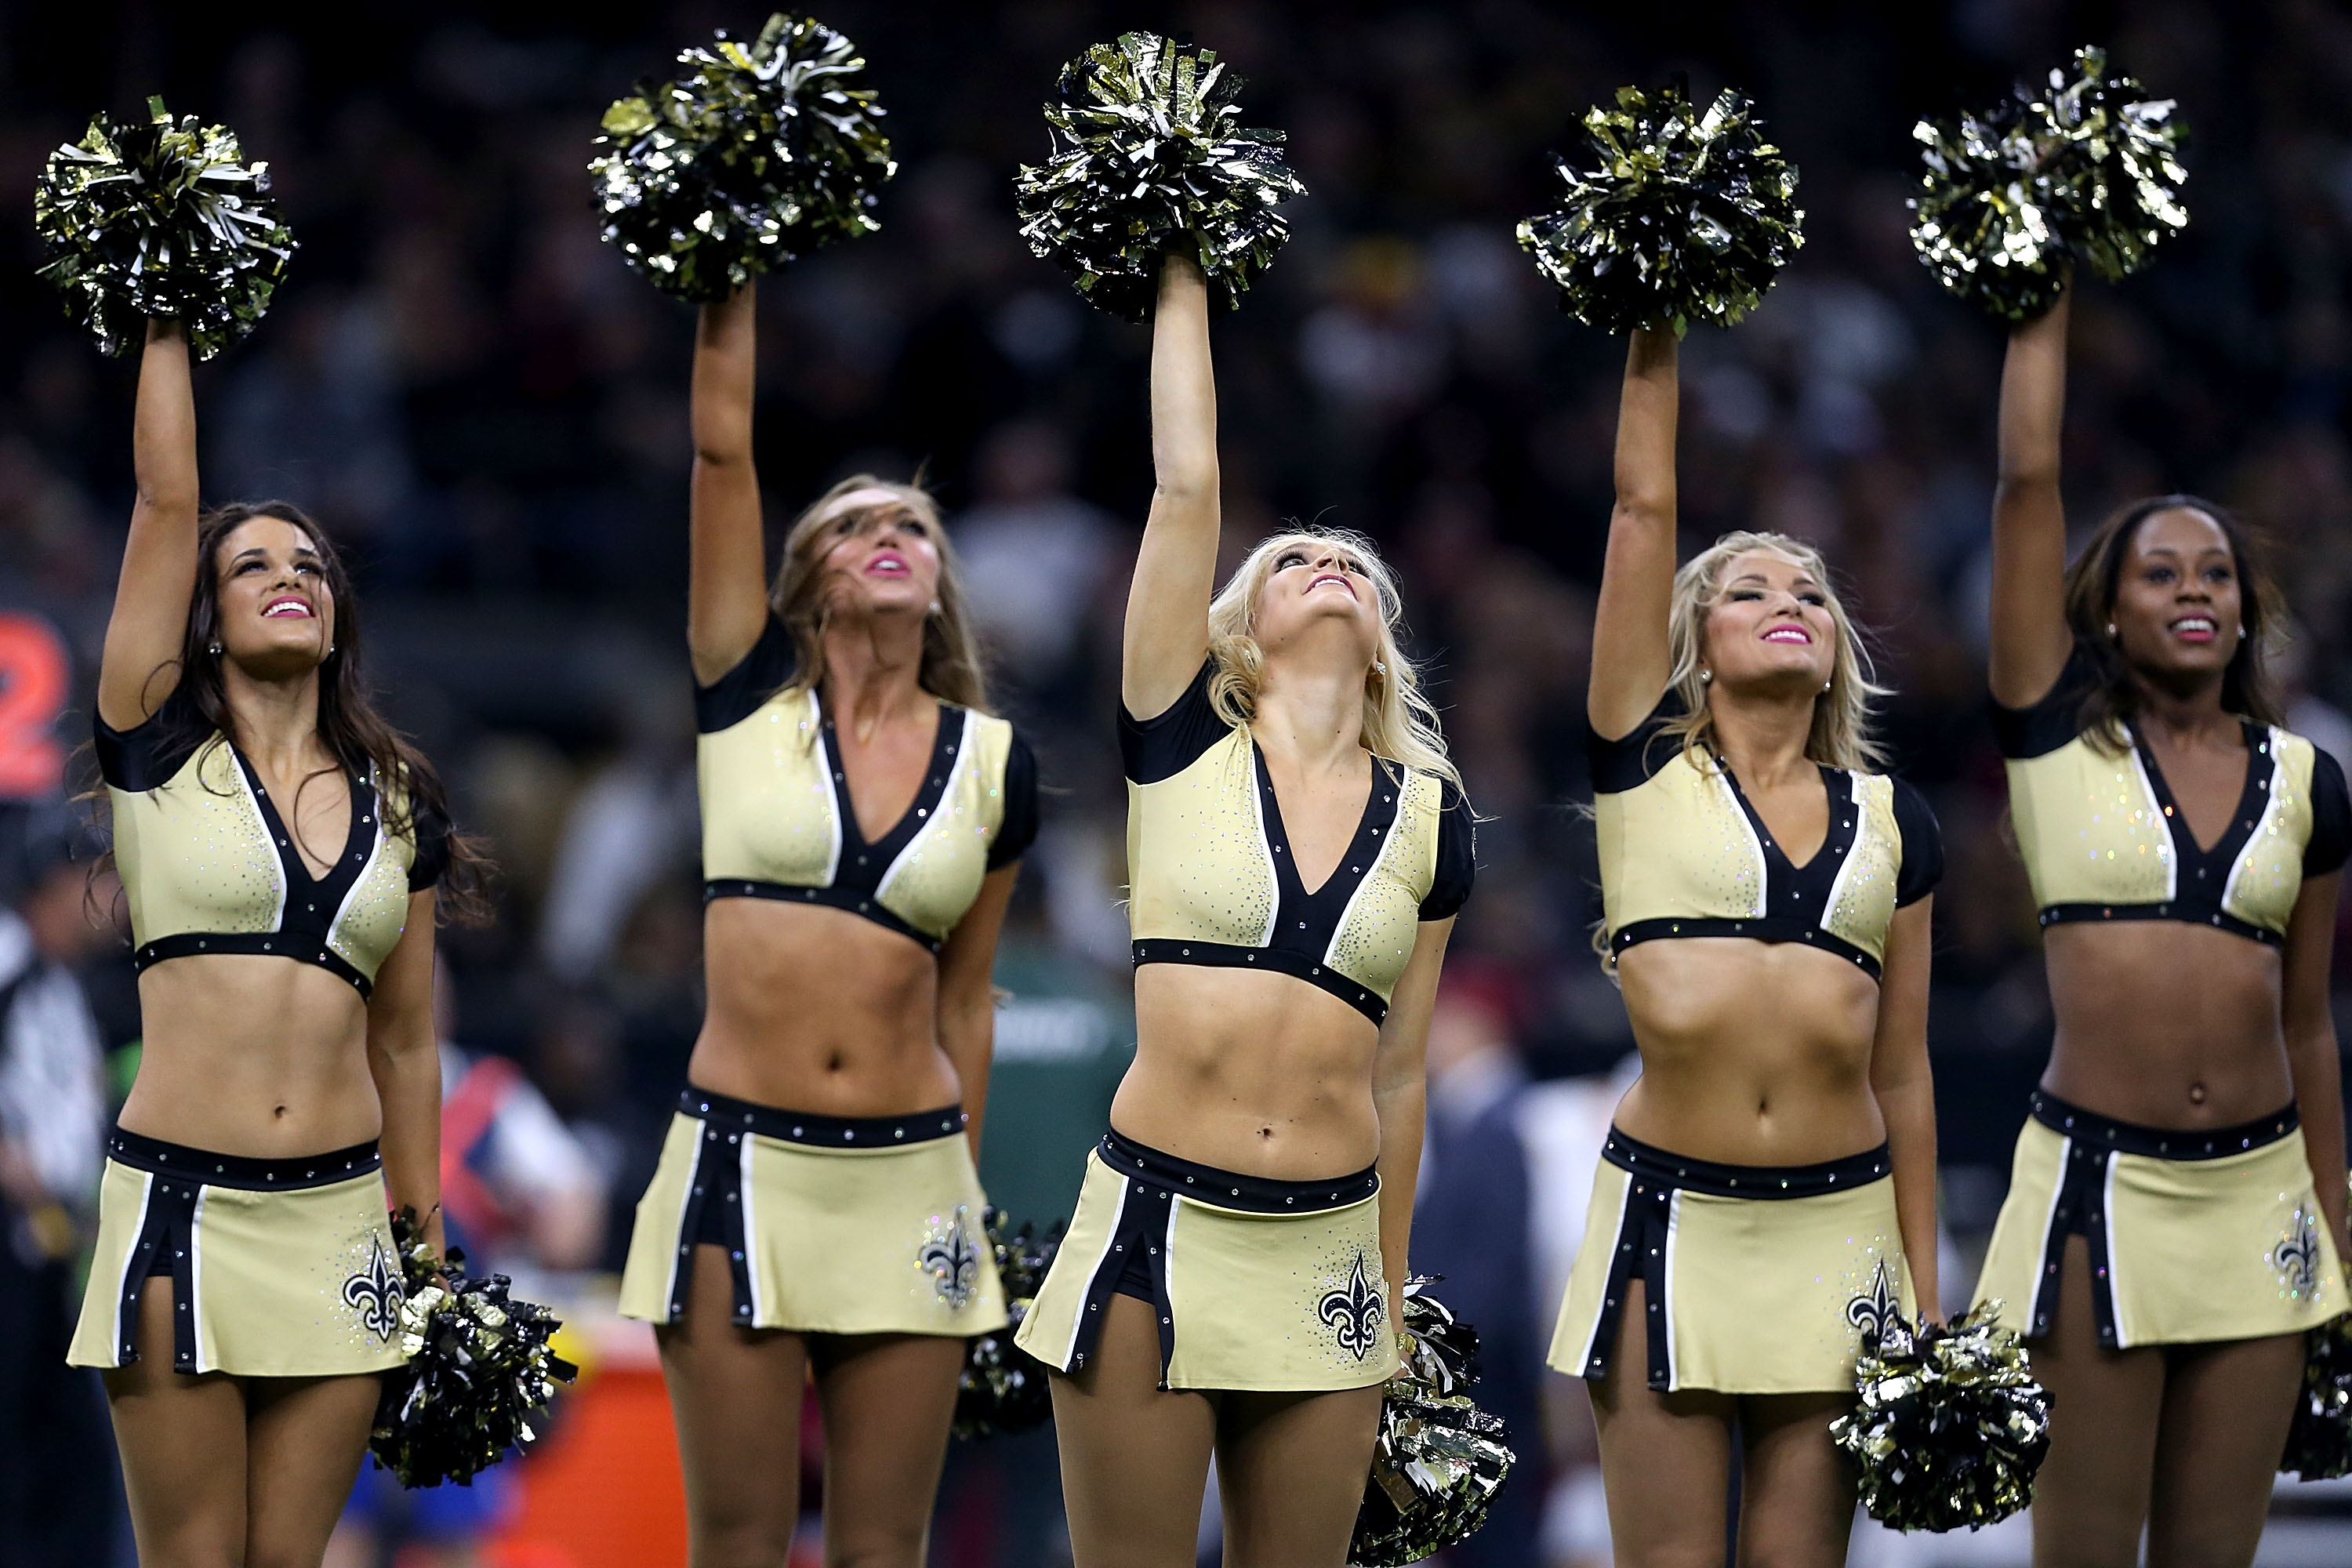 Ex-Dolphins cheerleader claims she faced discrimination after